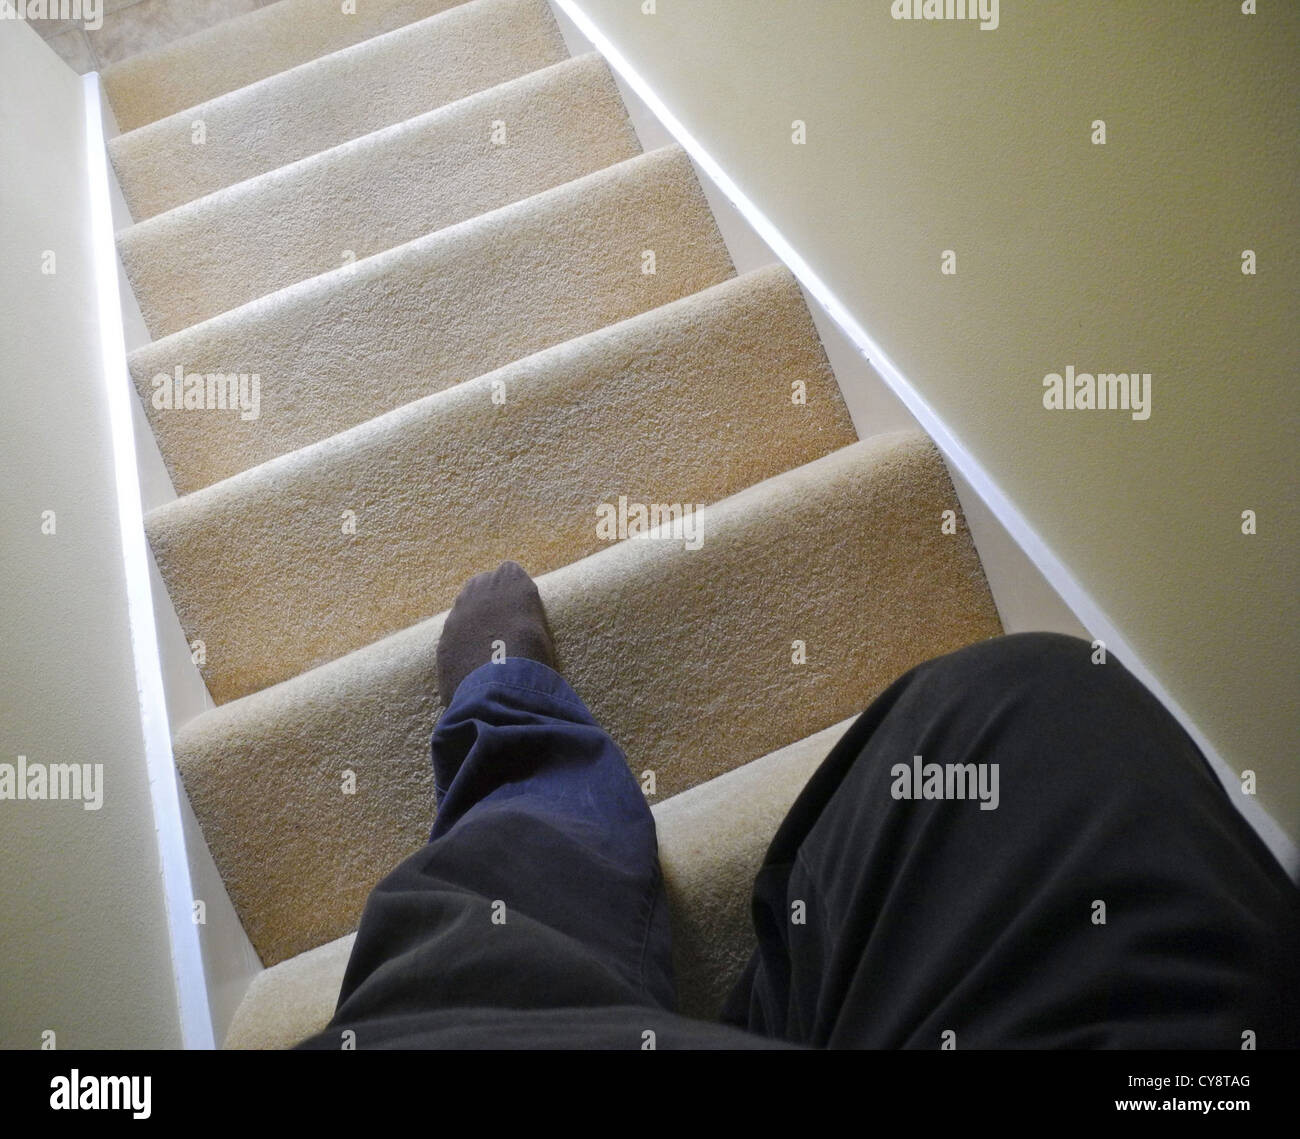 Old elderly person coming down stairs Stock Photo